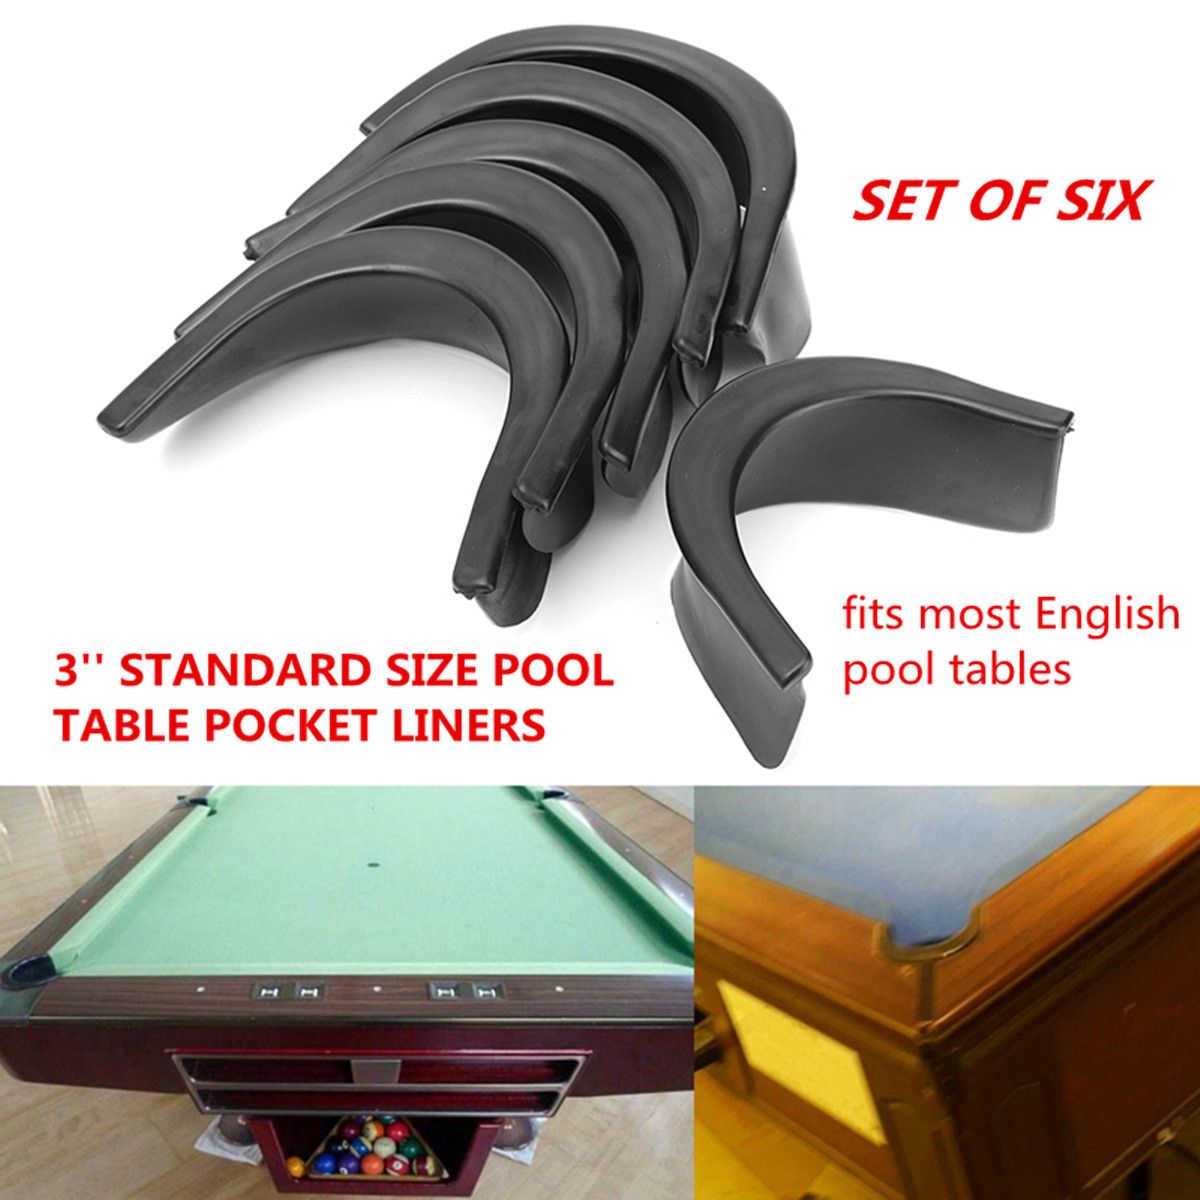 6PcsSet-Black-Rubber-Pool-Table-Pocket-Liners-Protector-Billiard-Snooker-Table-Liners-Decorations-1466200